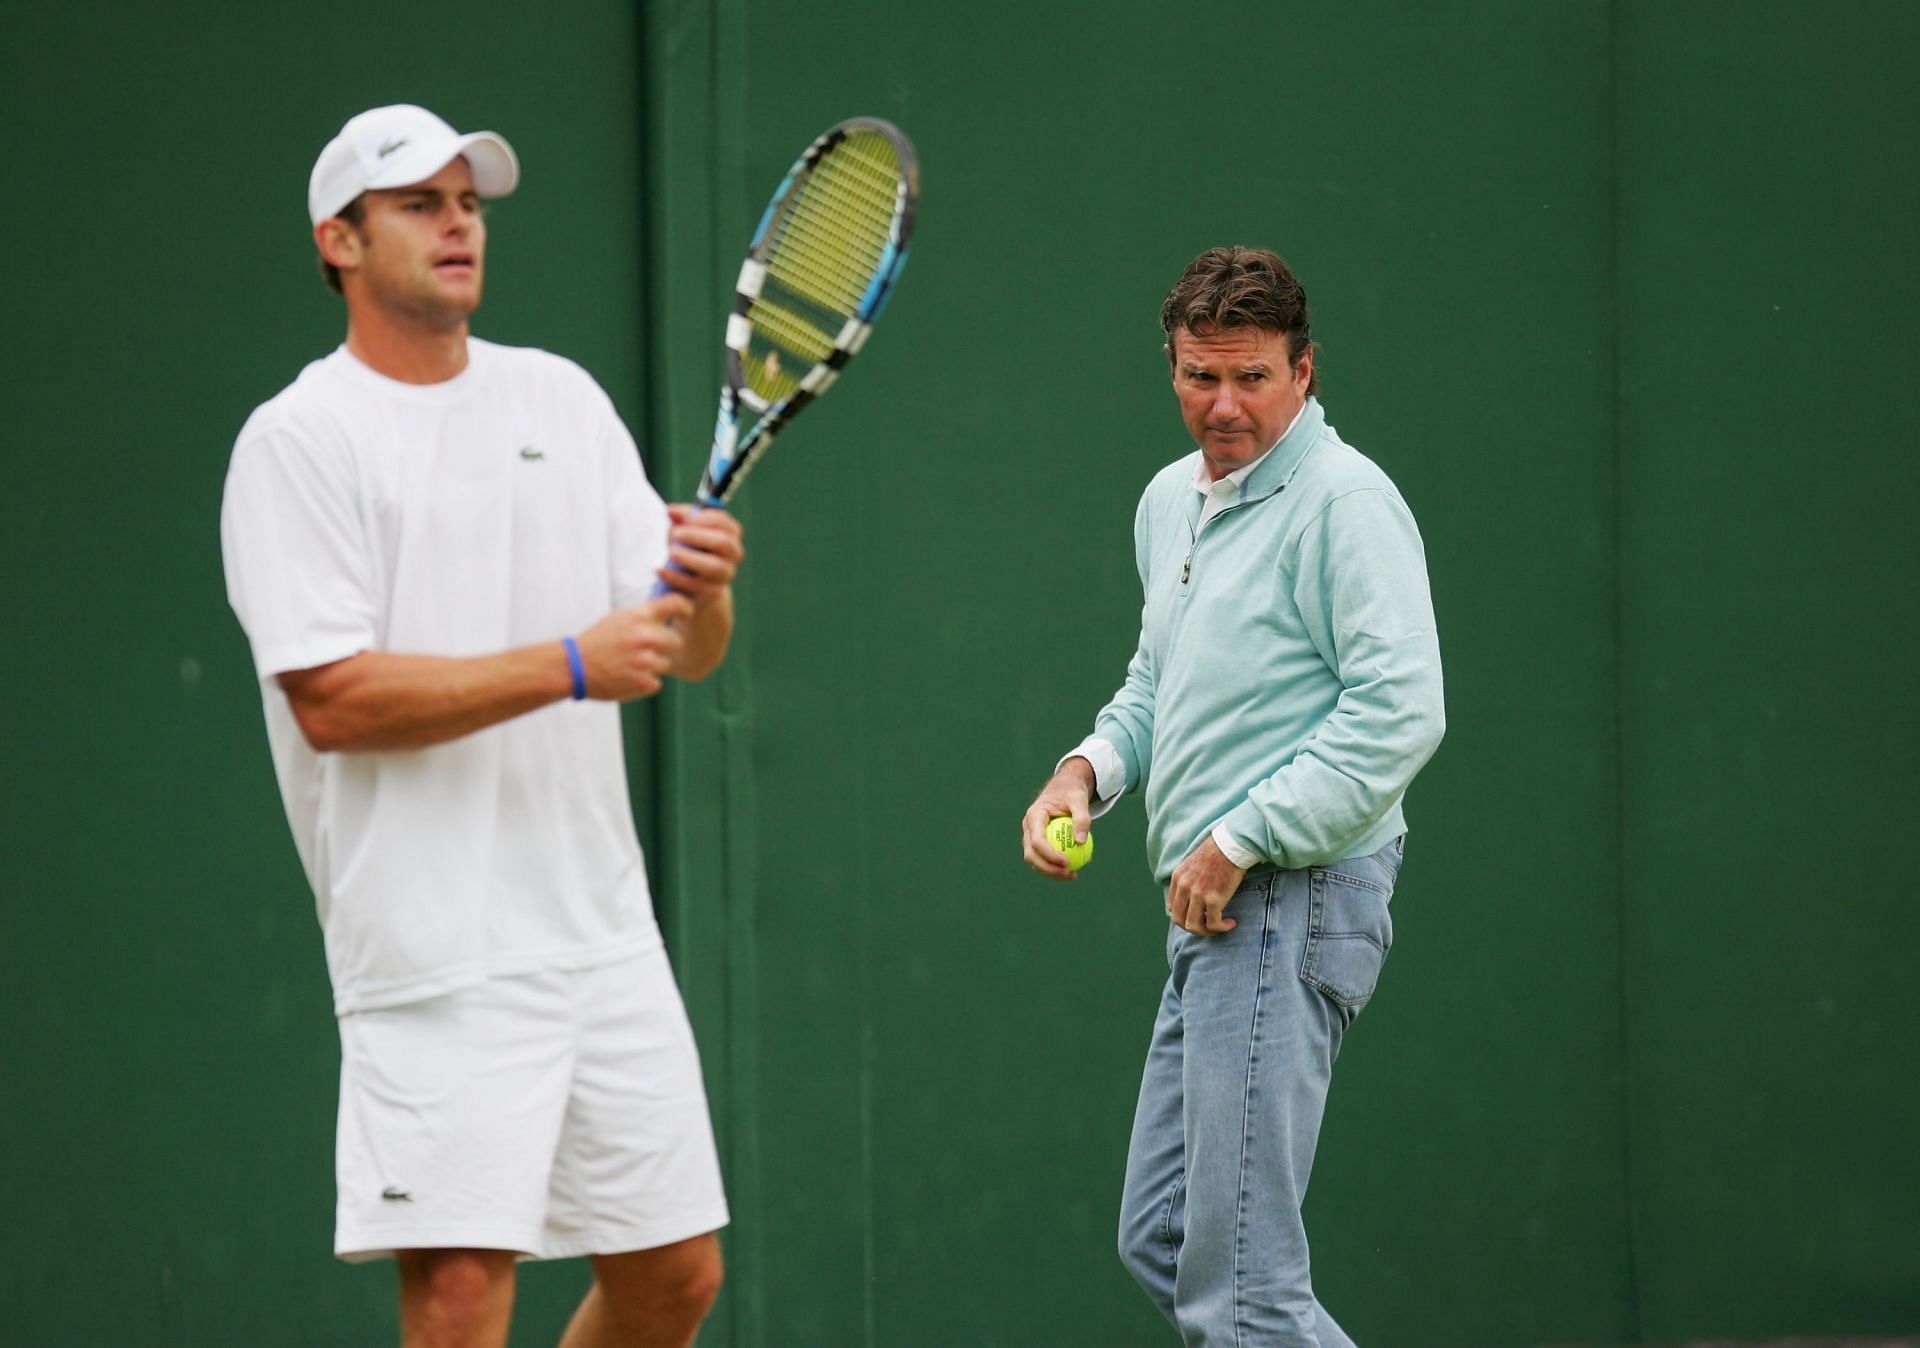 Andy Roddick and Jimmy Connors at the 2007 Artois Championships.